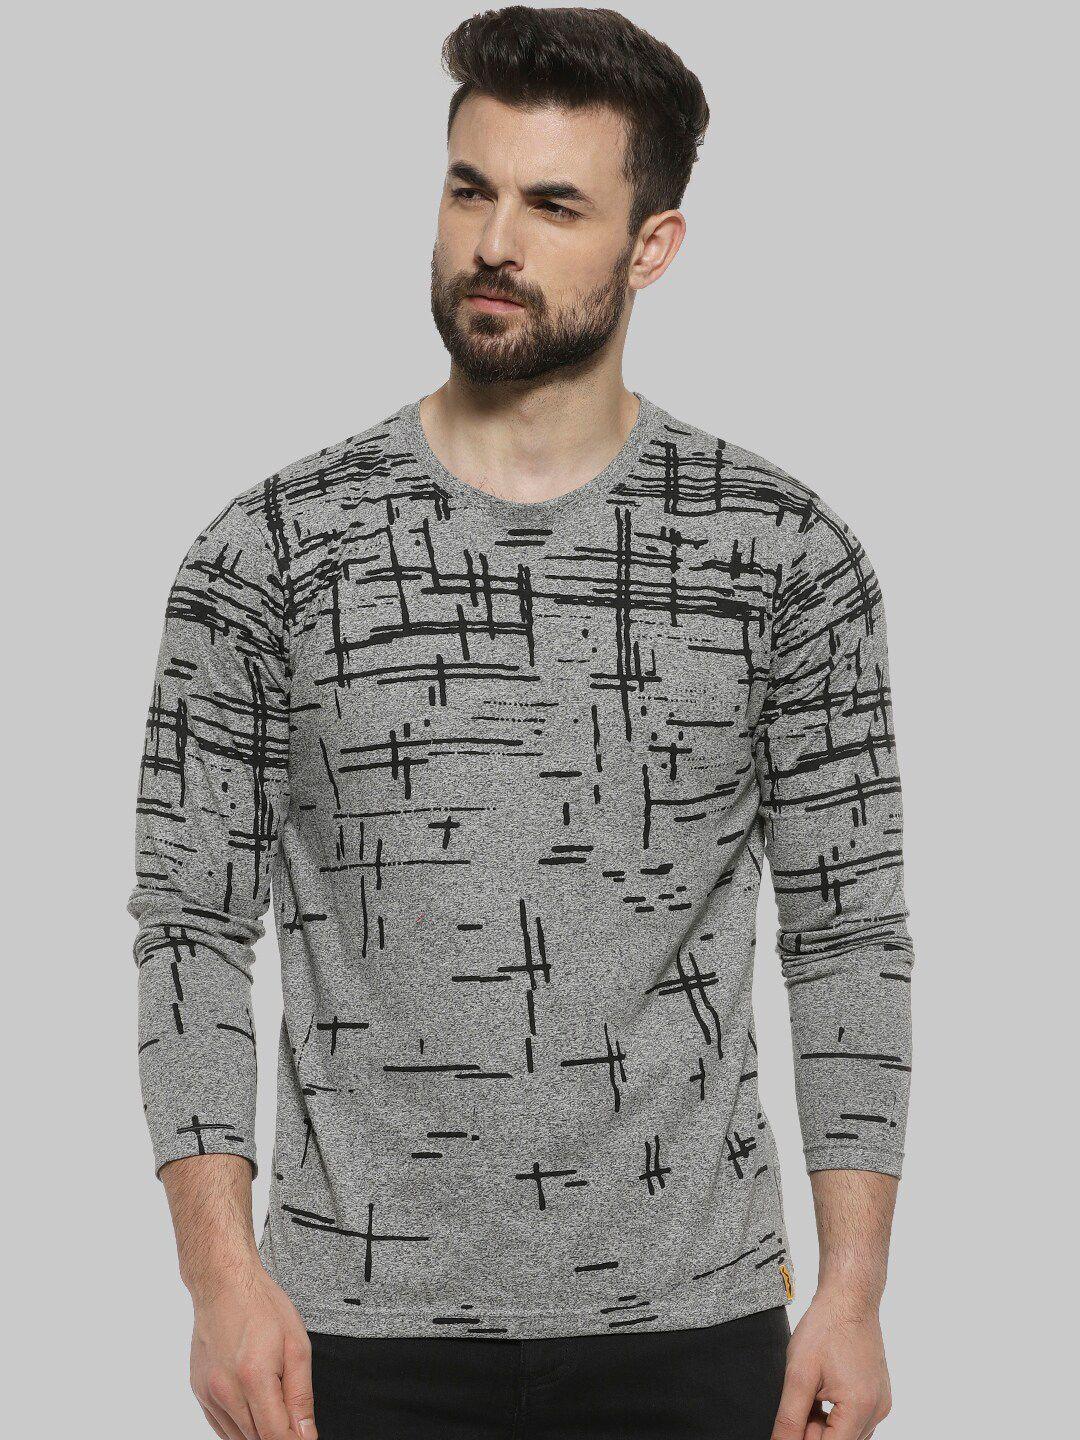 campus sutra grey abstract printed round neck long sleeves casual cotton t-shirt